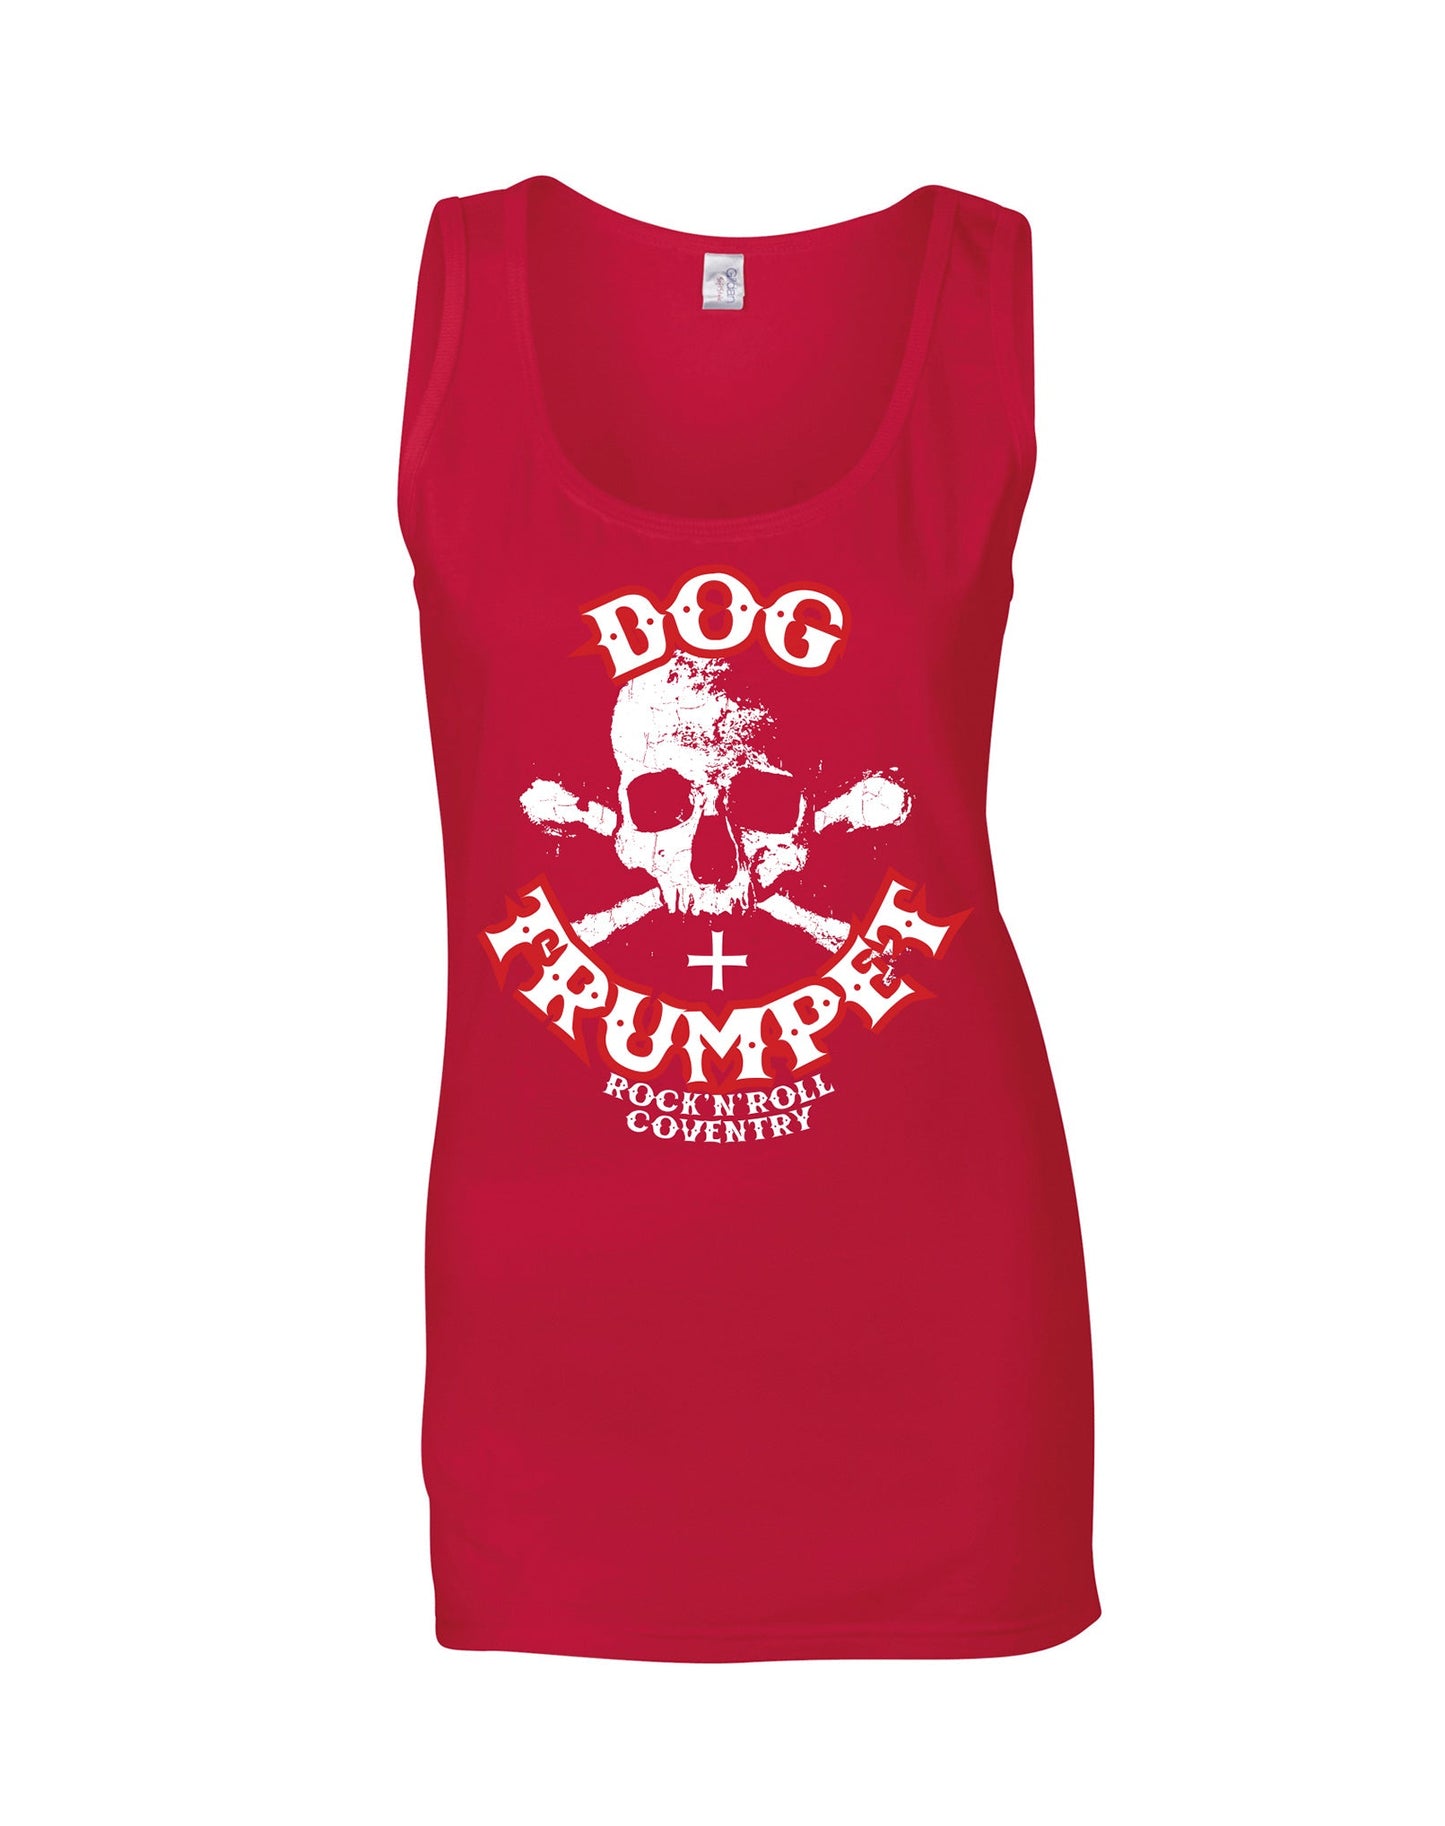 Dog & Trumpet (with skull) ladies fit vest - various colours - Dirty Stop Outs